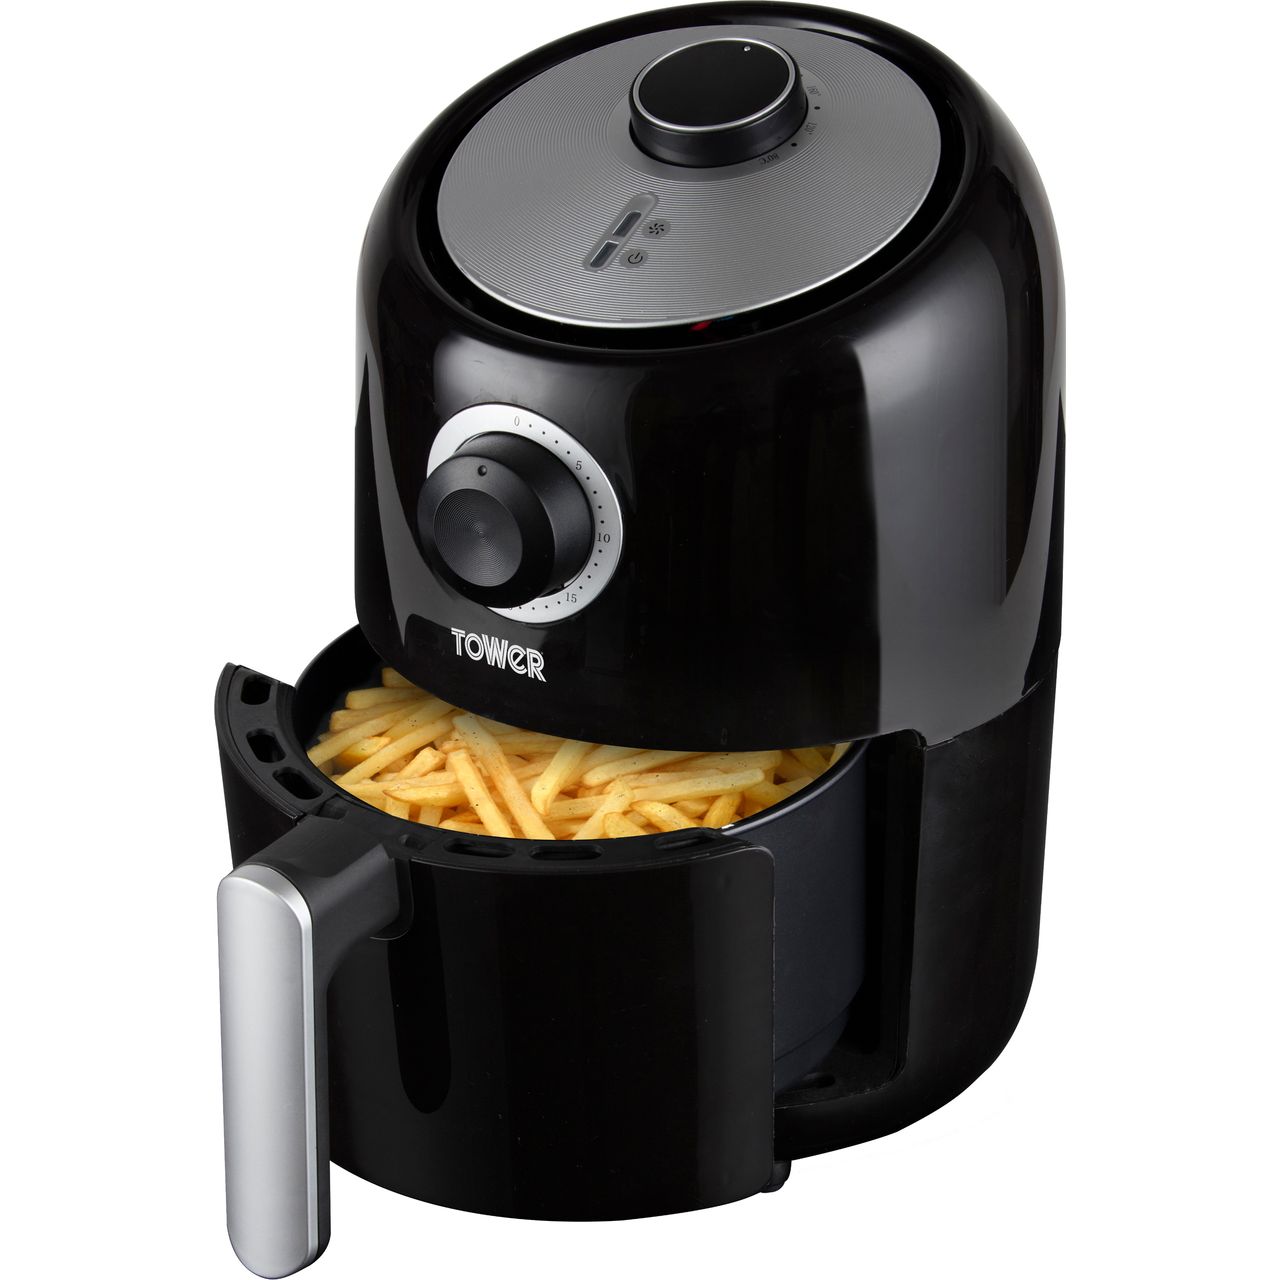 Tower T17026 Compact Air Fryer Review